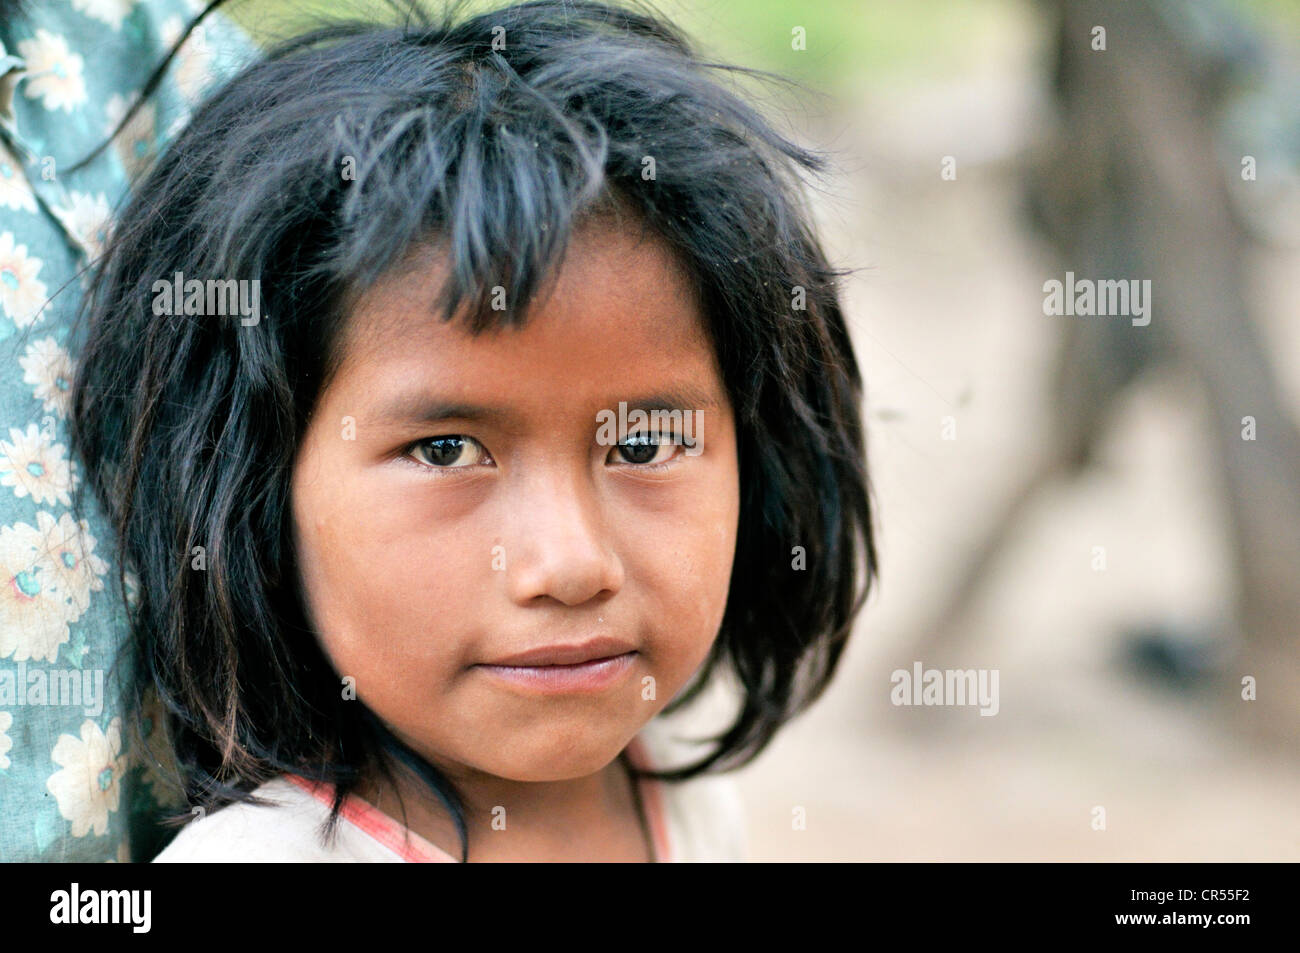 Portrait of an indigenous girl from the Wichi Indians tribe, Comunidad Chuchuy, Gran Chaco, Salta, Argentina, South America Stock Photo